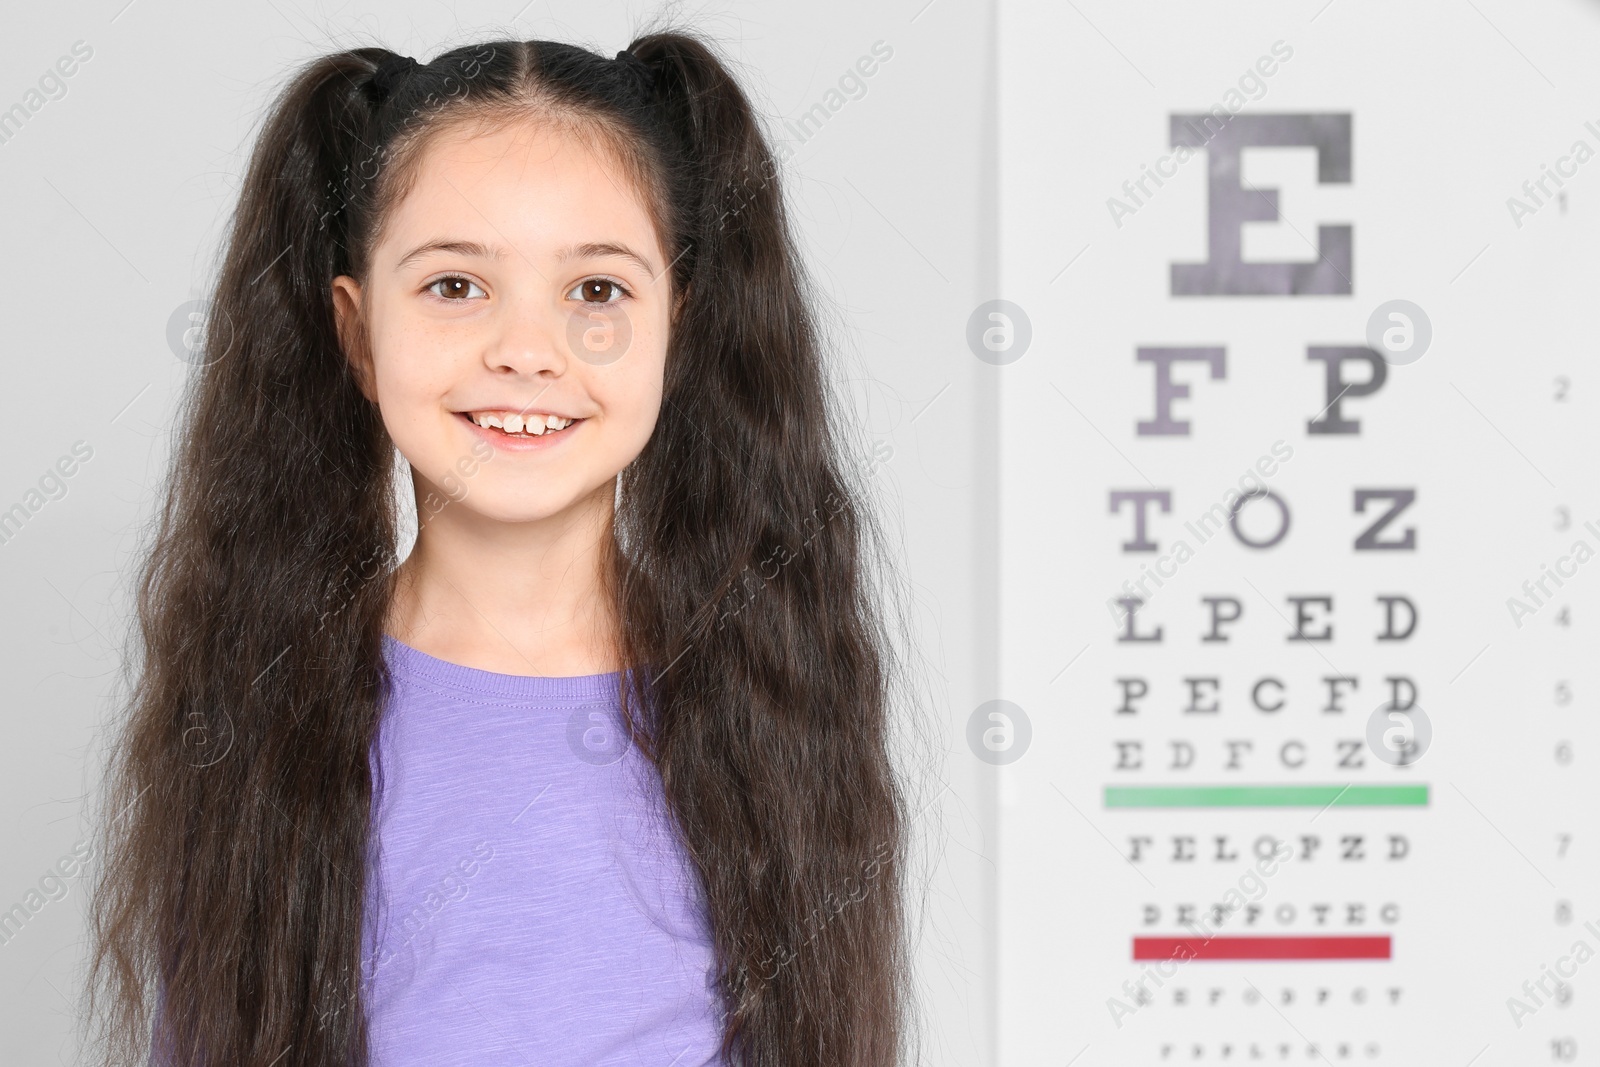 Photo of Portrait of cute little girl visiting children's doctor, space for text. Eye examination